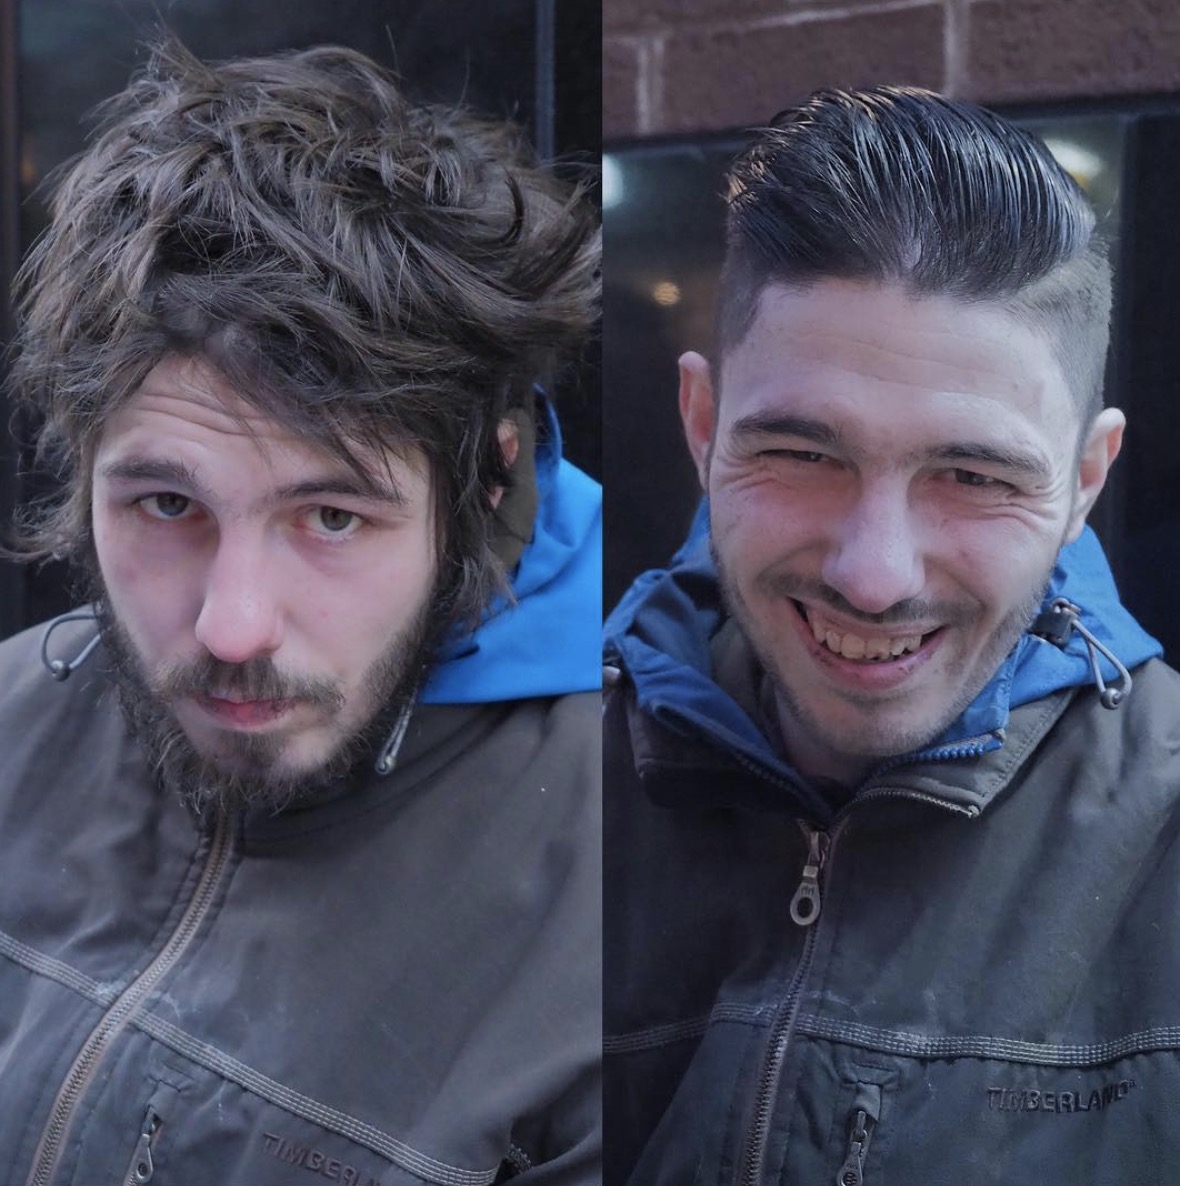 This Barber Gives Free Haircuts To Homeless People And